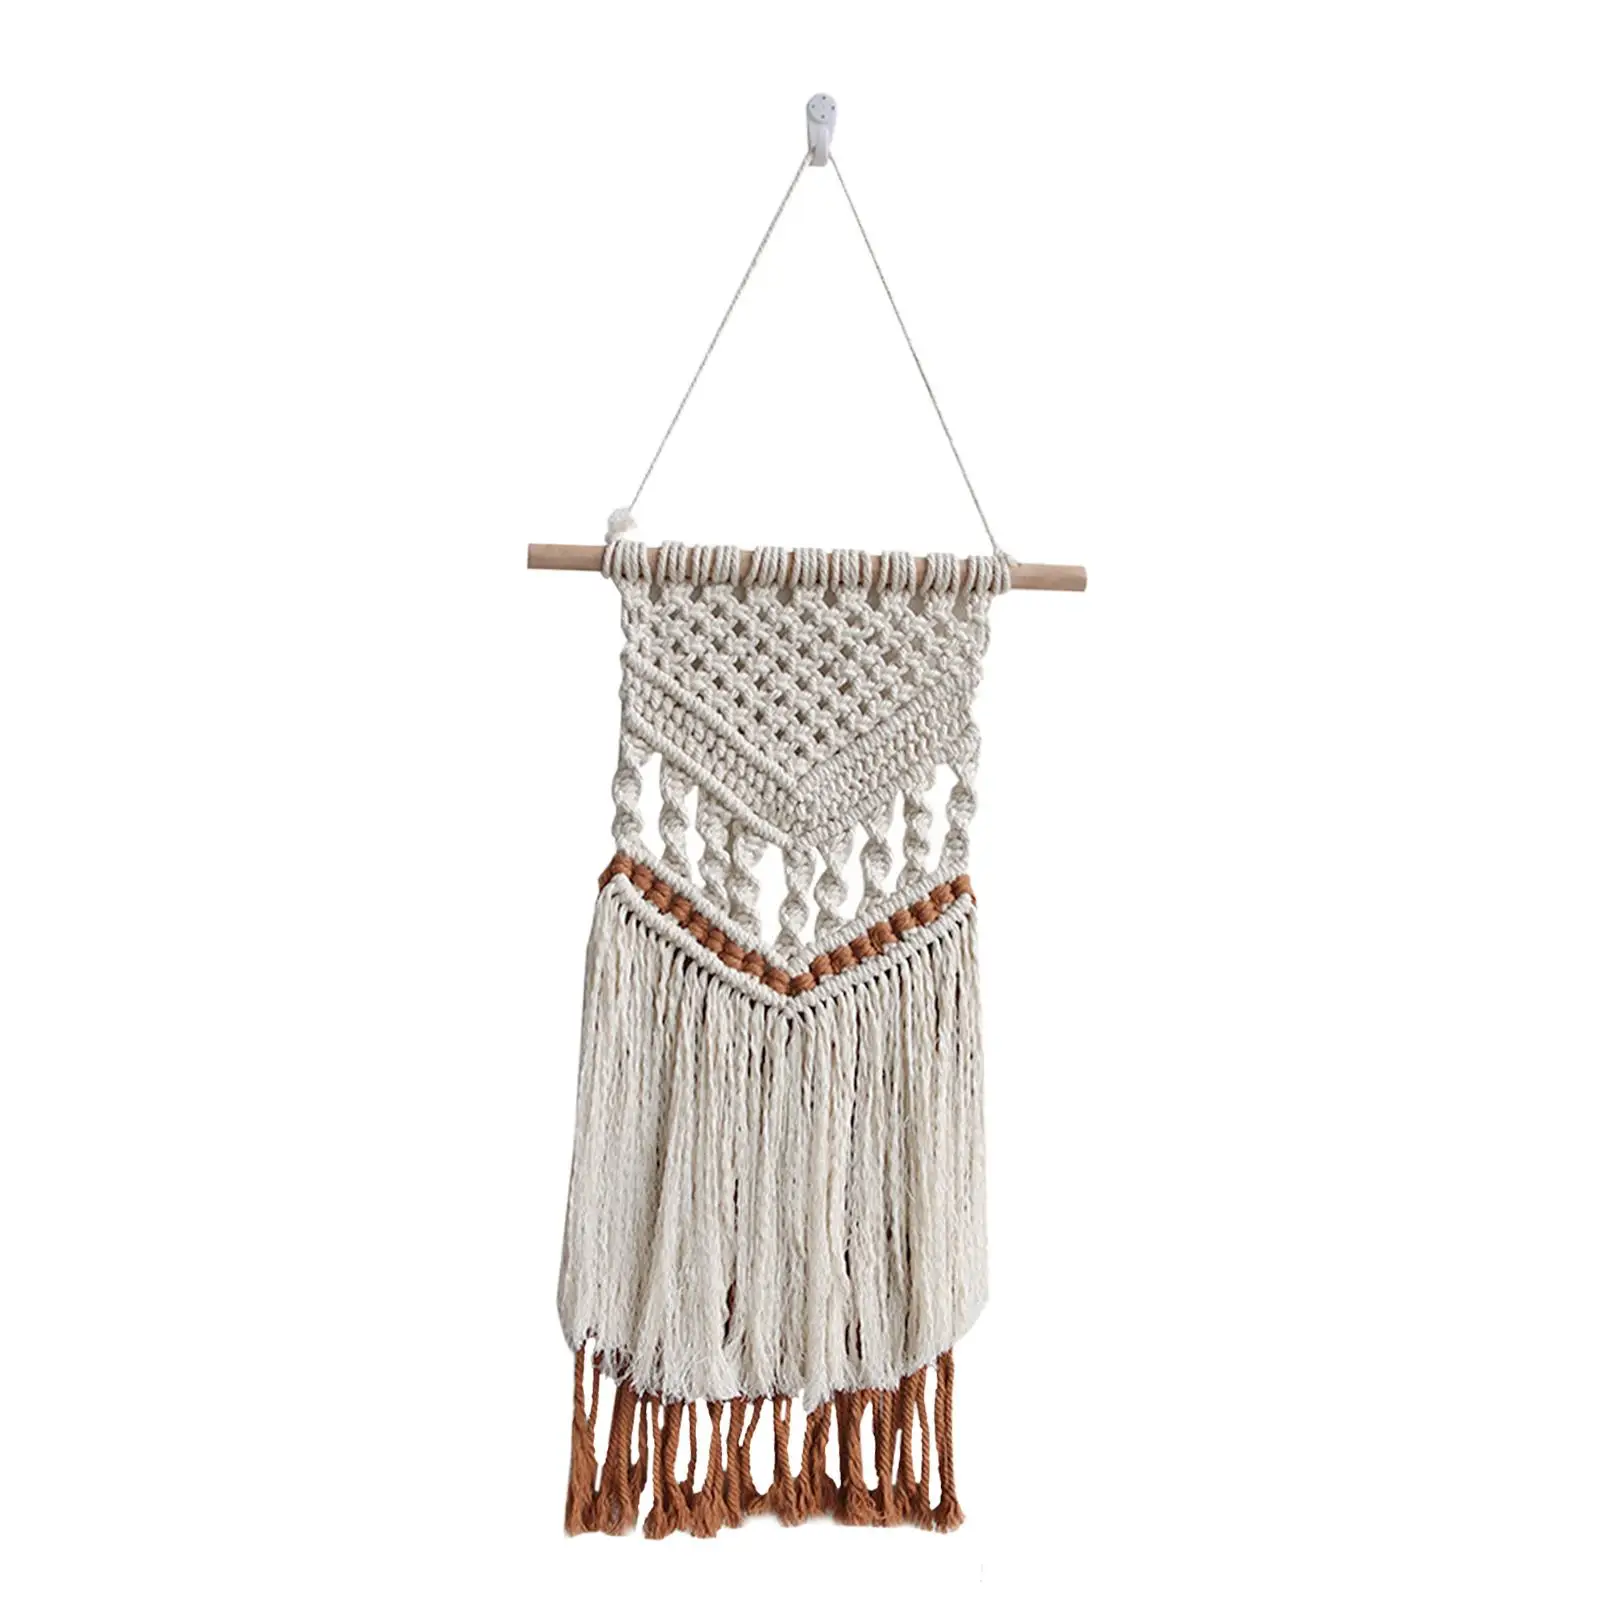 Macrame Wall Hanging Chic Backdrop Wall Art Hand Woven Tapestry Boho Tapestry